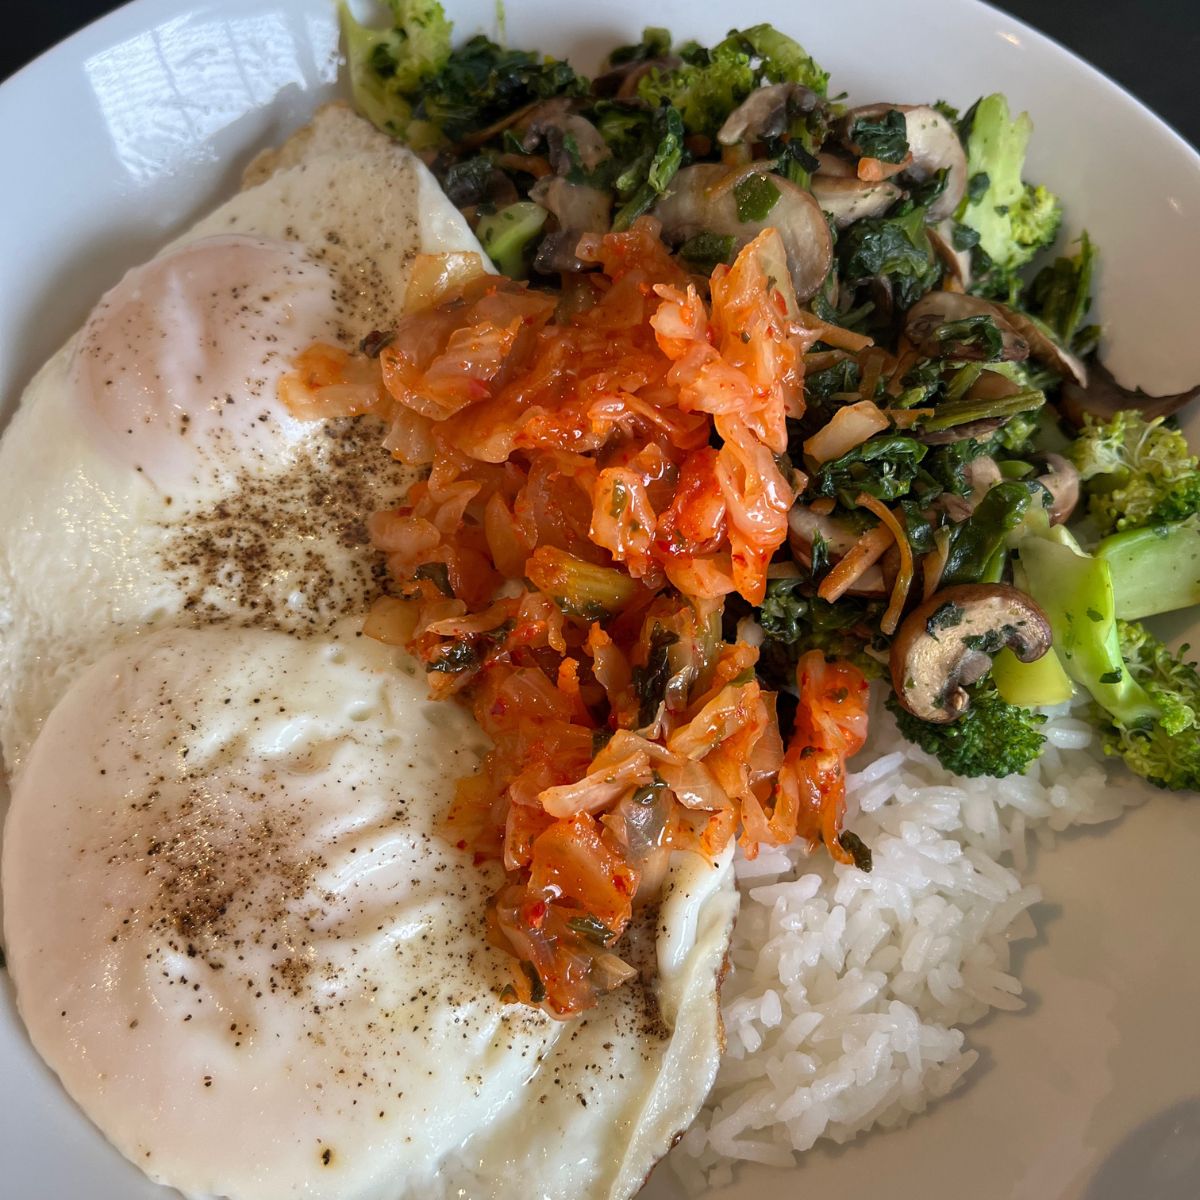 eggs and kimchi with rice and veggies.